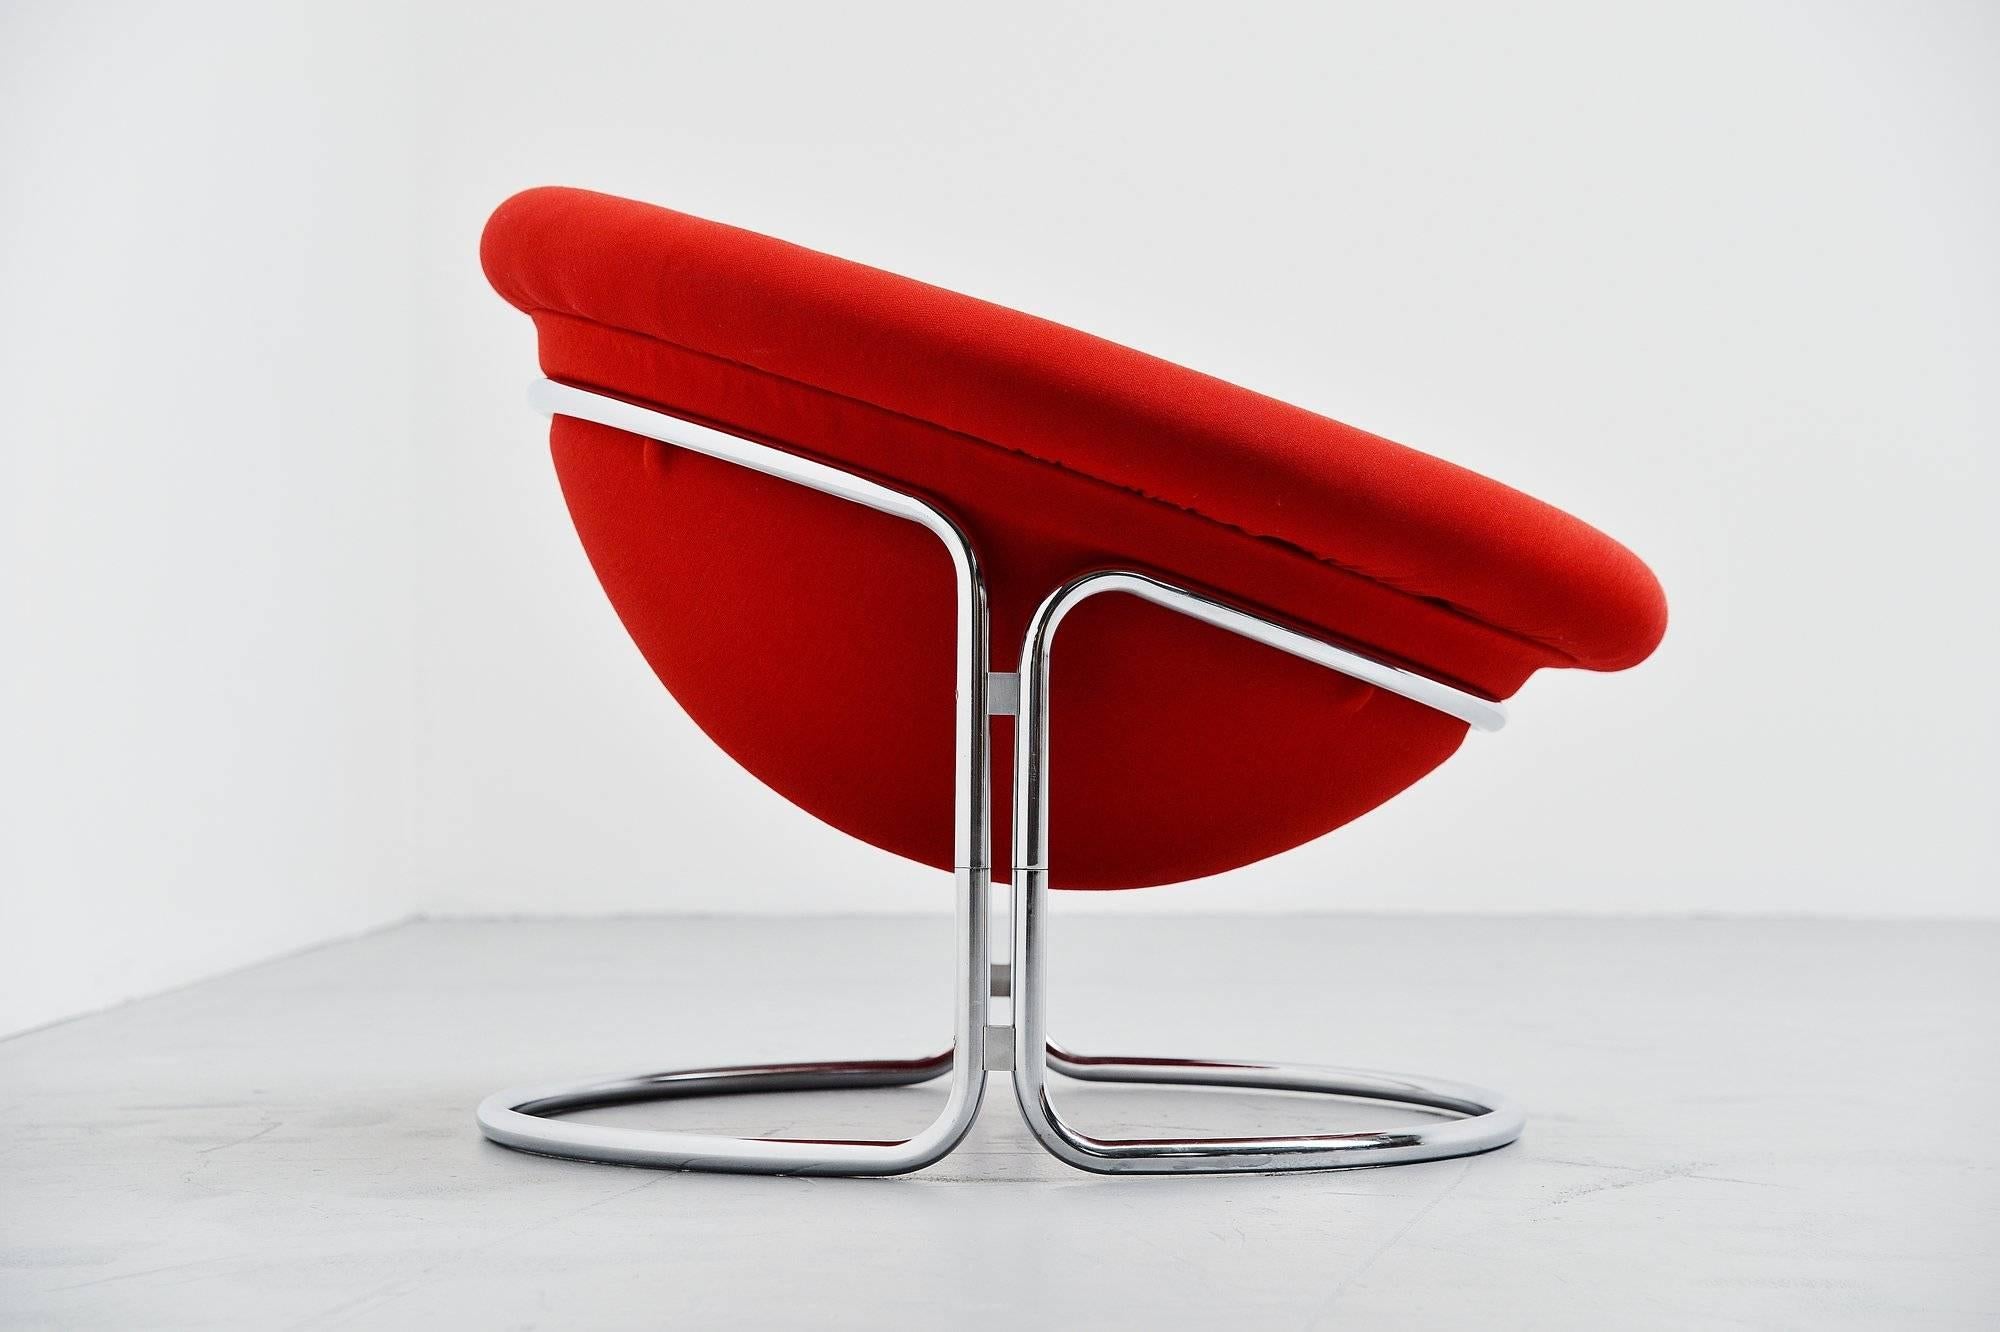 Plated Luigi Colani Lounge Chair for Kusch & Co, Germany, 1968